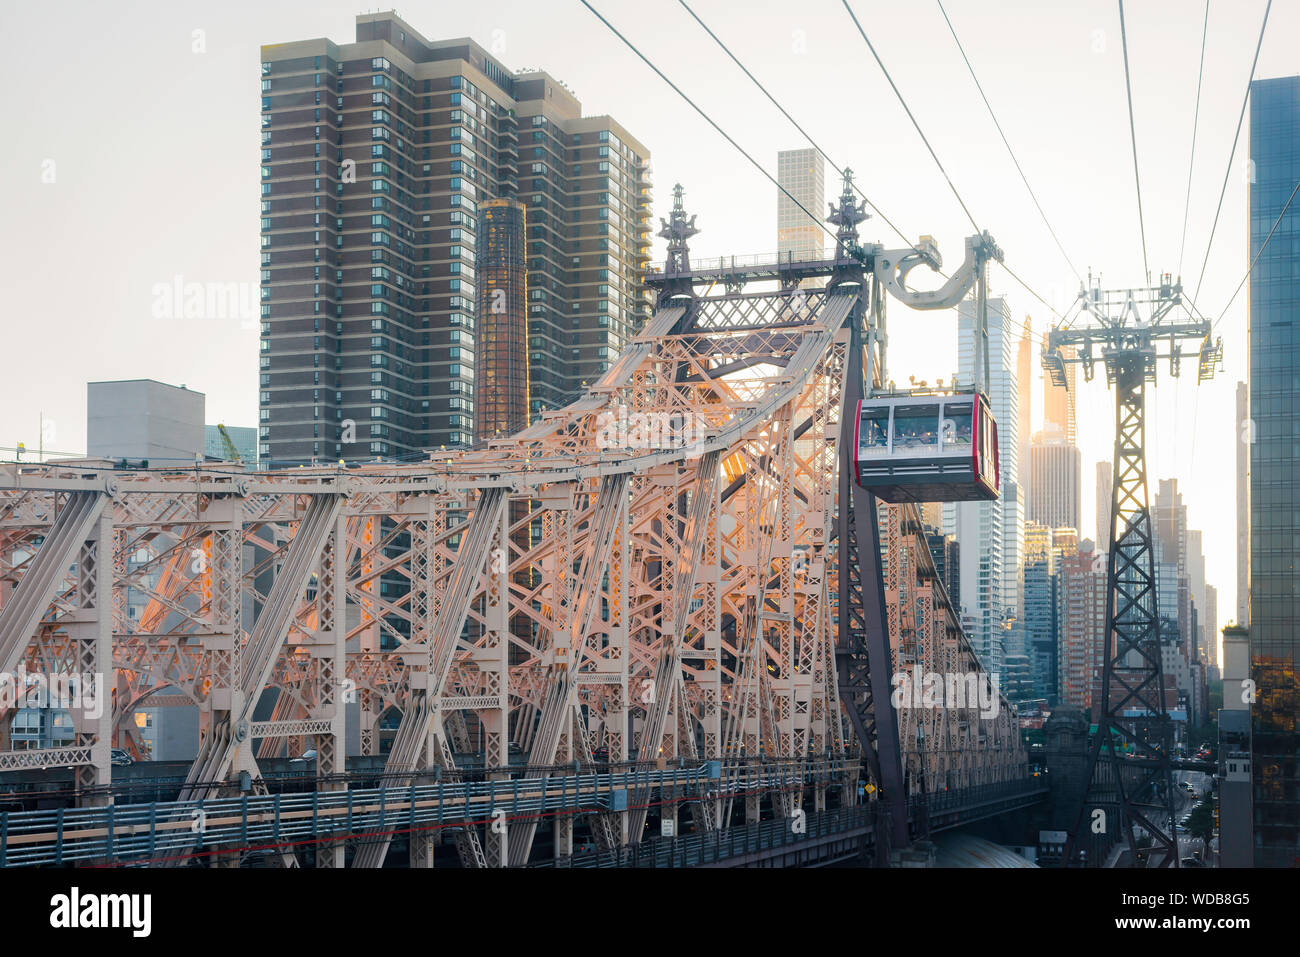 Roosevelt Island Tramway, view of an aerial tram car alongside the Queensboro Bridge in Manhattan travelling to Roosevelt Island, New York City, USA Stock Photo